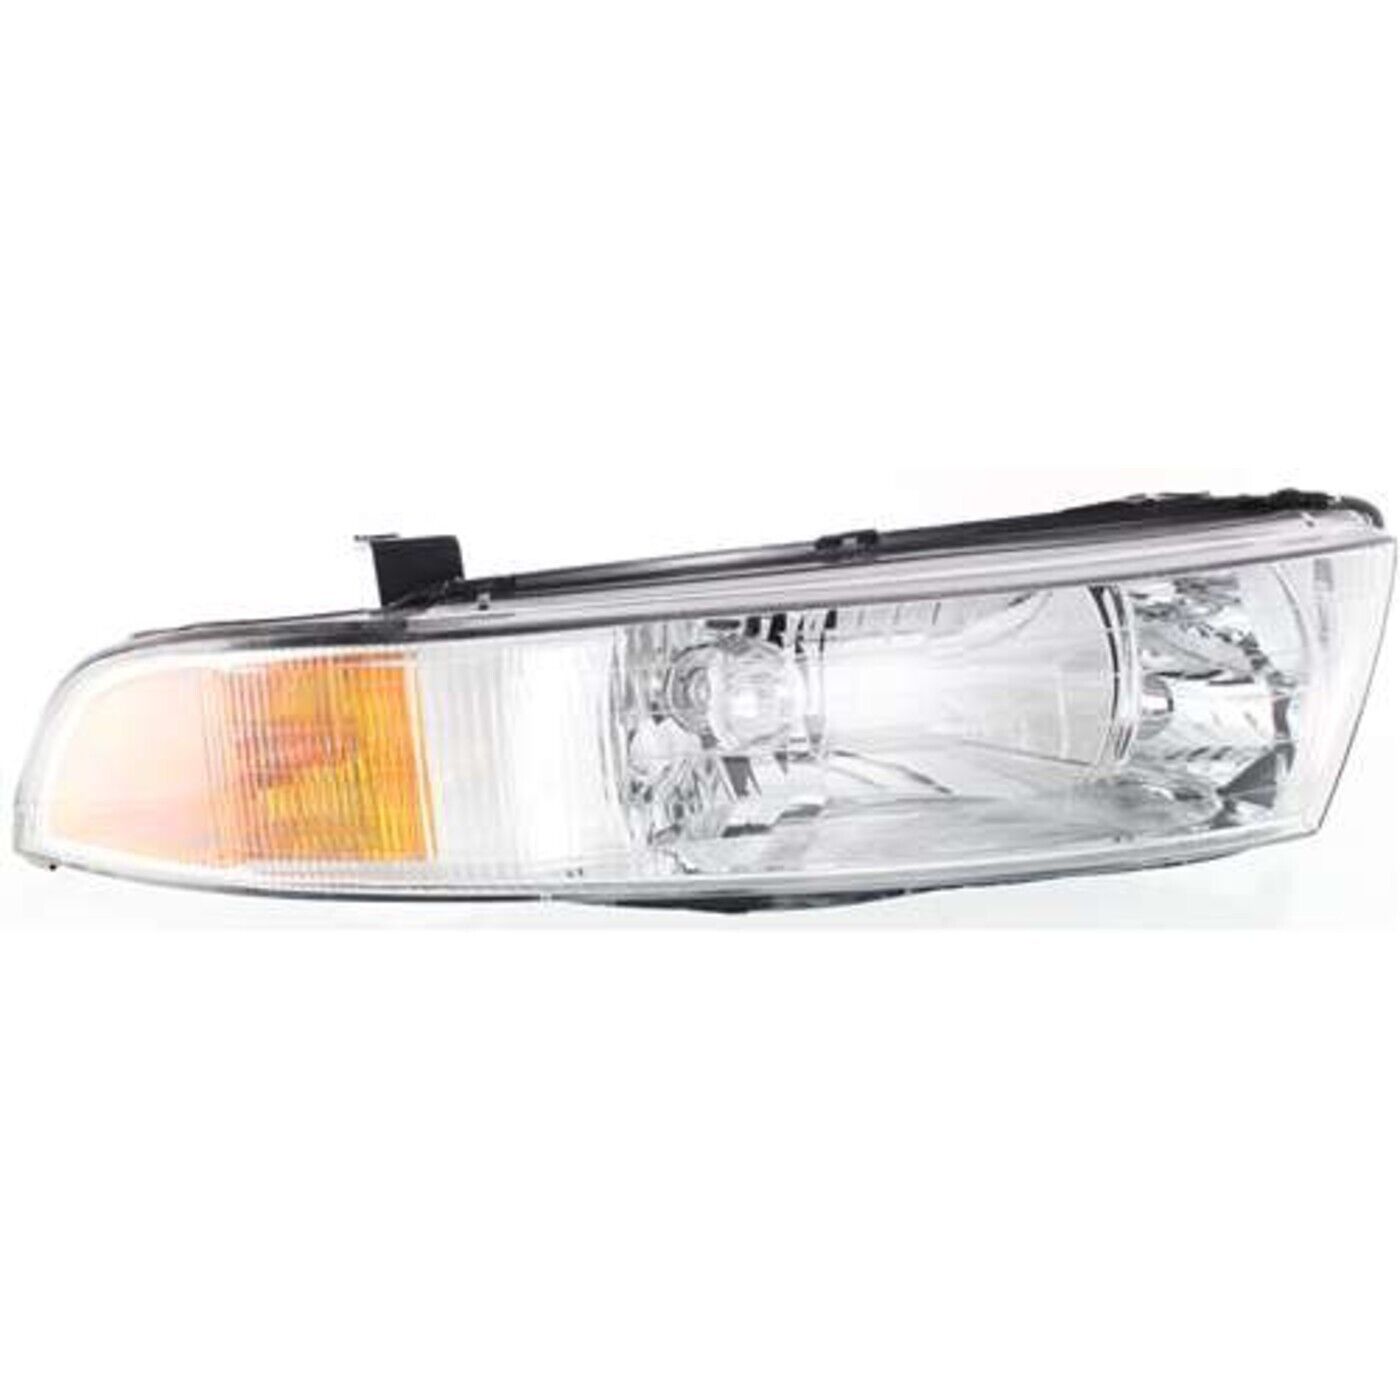 Headlight For 99 2000 2001 Mitsubishi Galant Right With Bulb